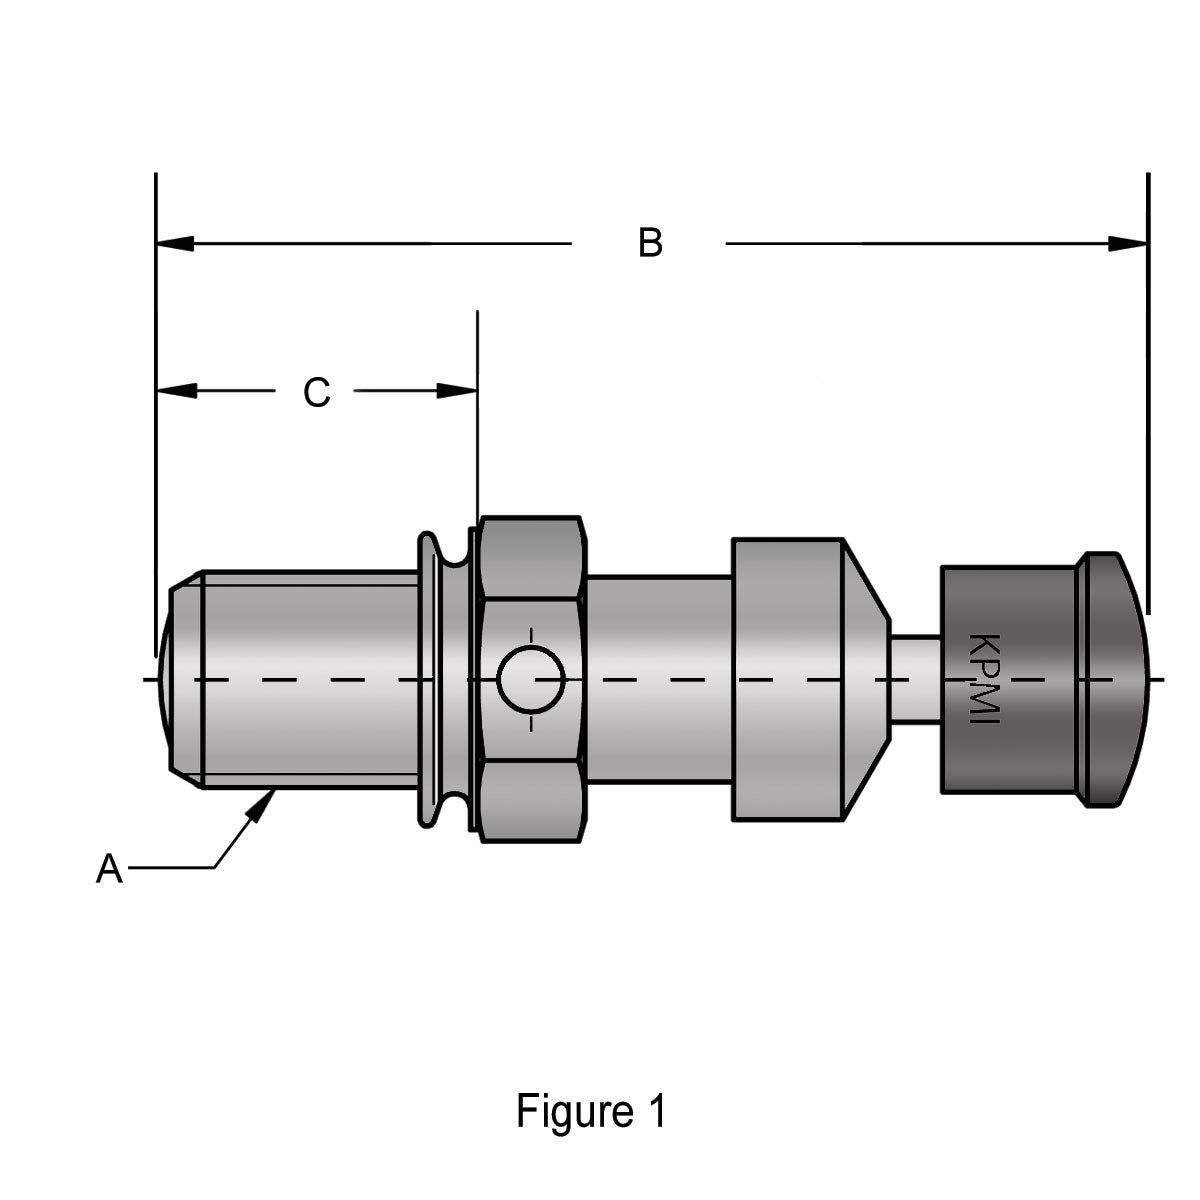 Compression Release Valve, 1.750" OL, Various HD® Applications